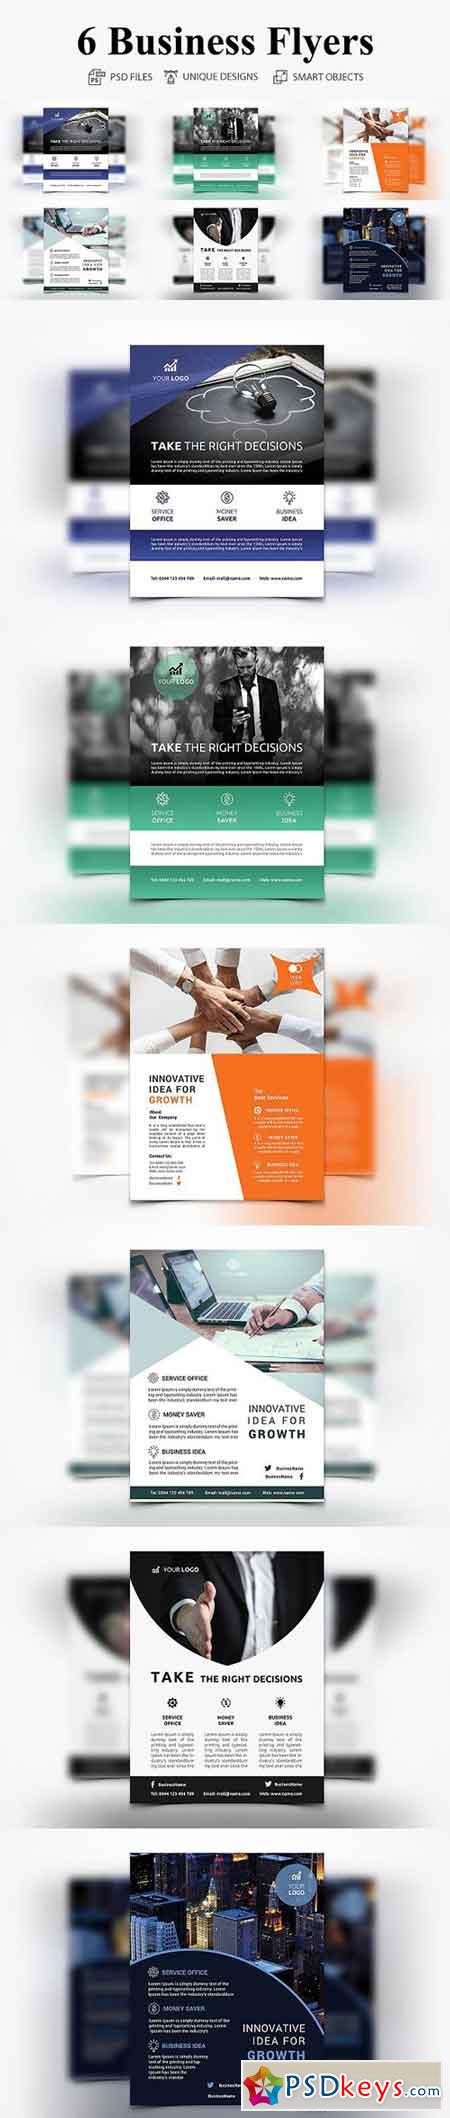 6 Business Flyers 2857612